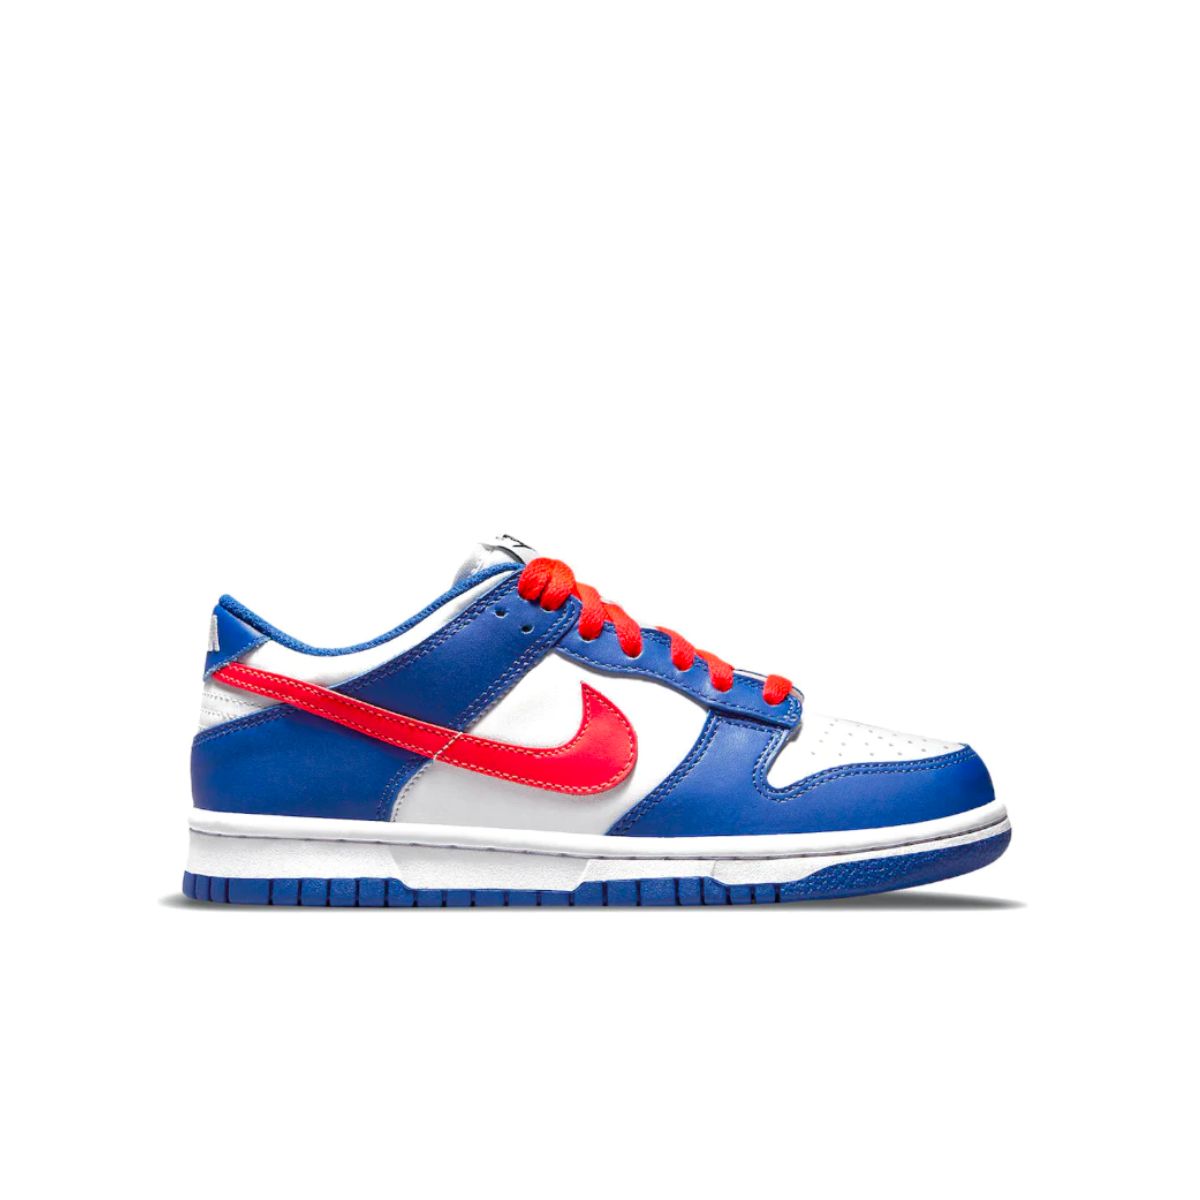 Nike, Dunks, Red Shoelace, Replacements